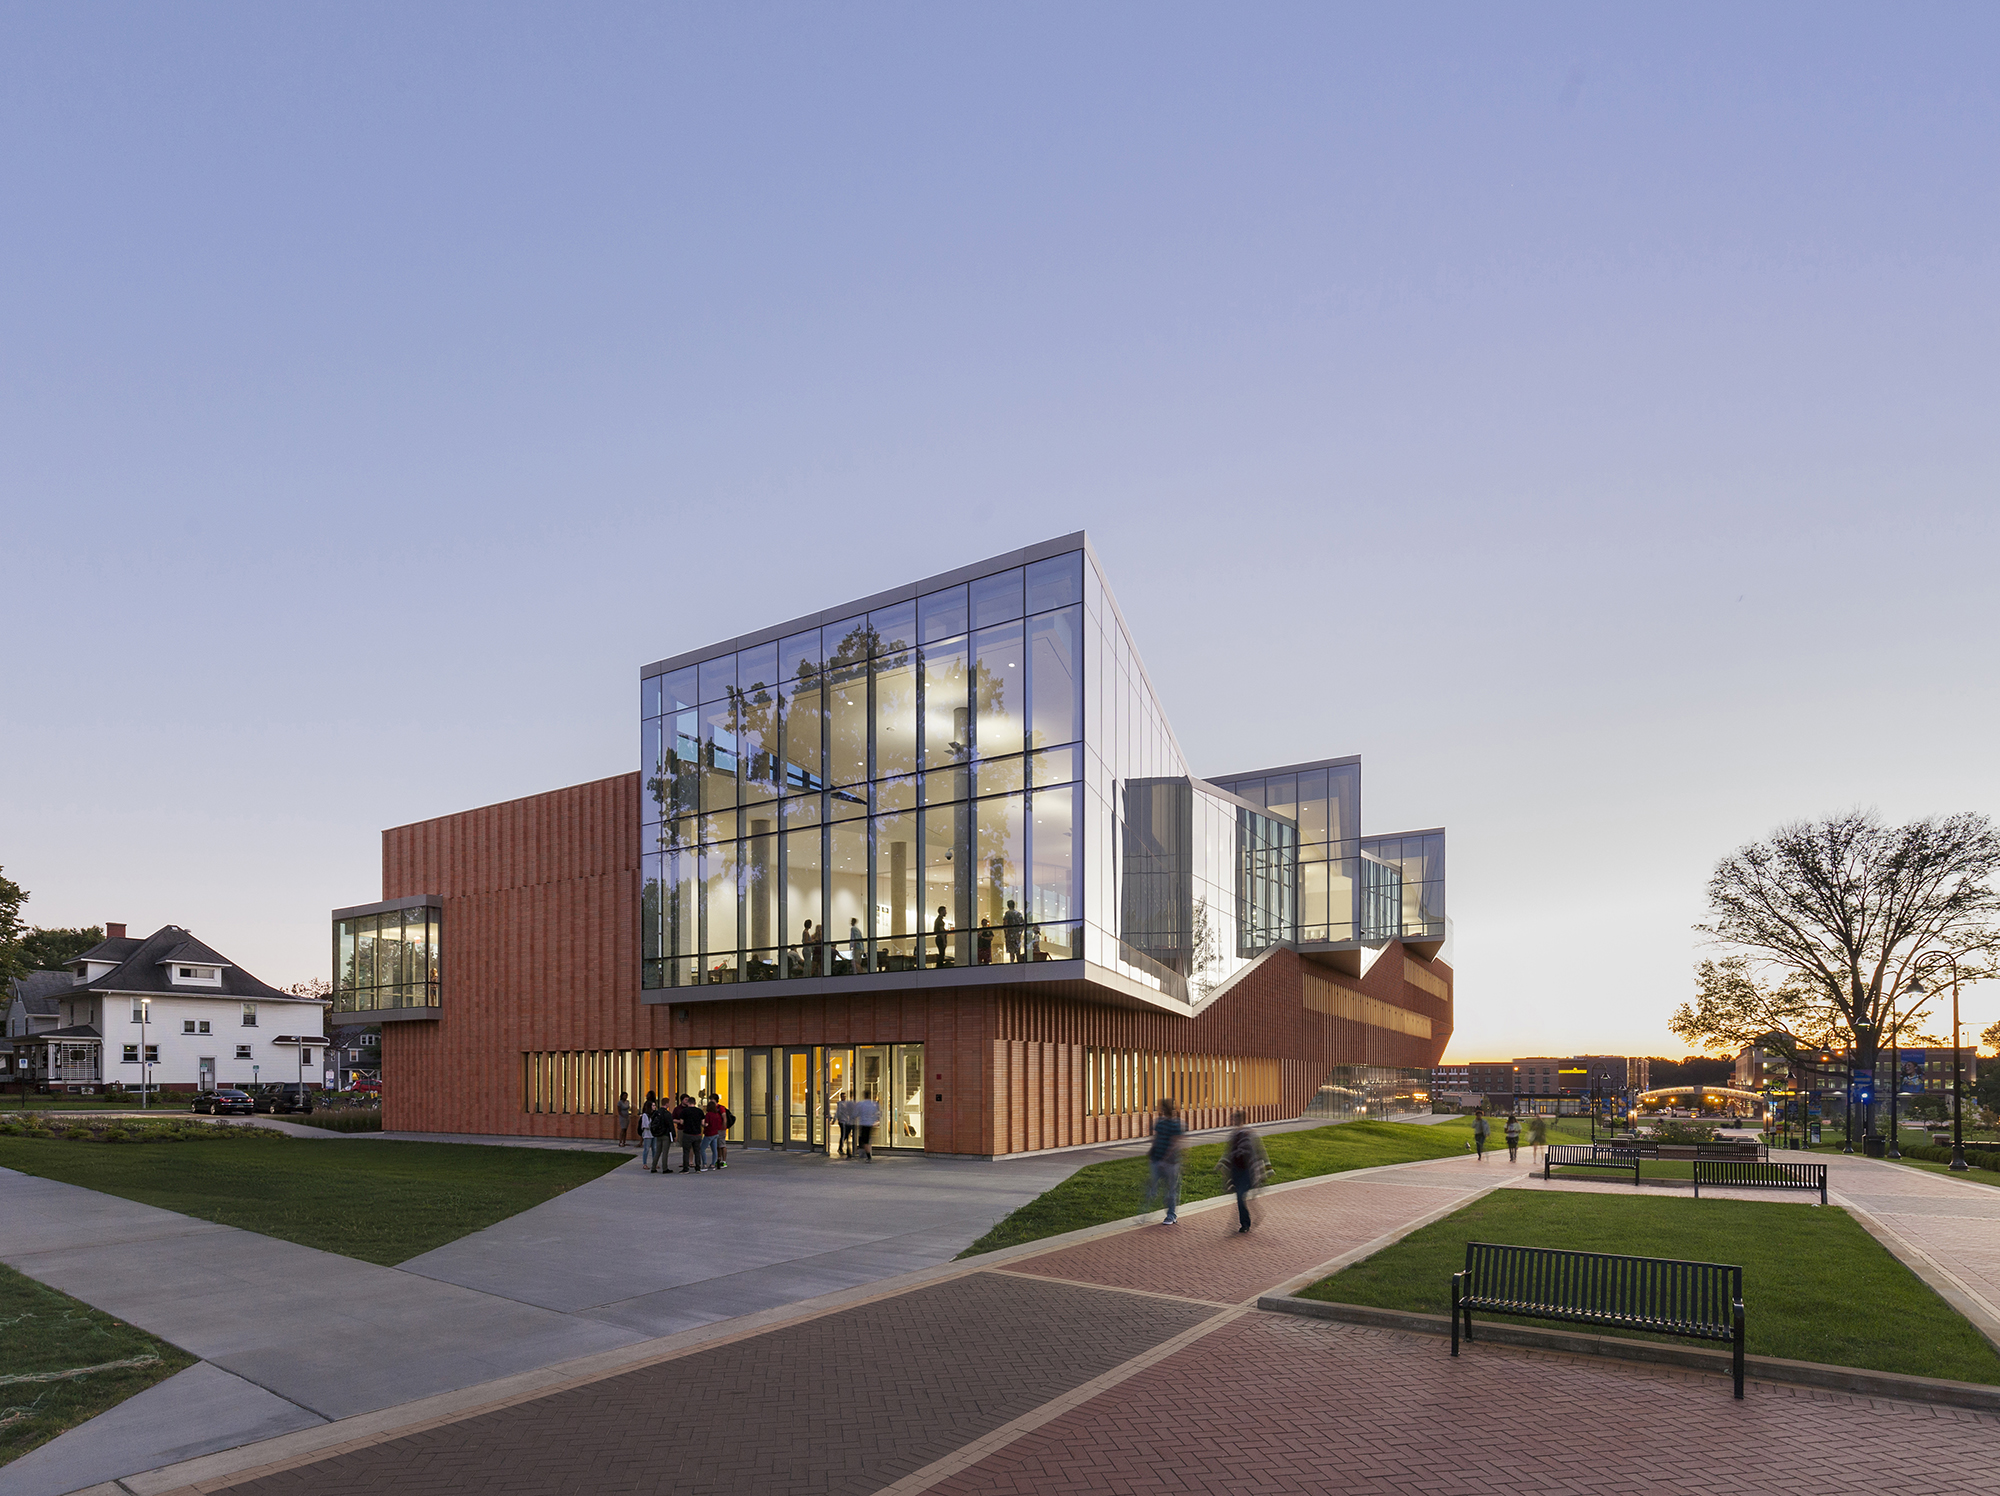 Kent State Center for Architecture and Environmental Design by WEISS/MANFREDI Architecture/Landscape/Urbanism with Richard L. Bowen + Associates and Knight and Stolar. Credit: Albert Vecerka/Esto.